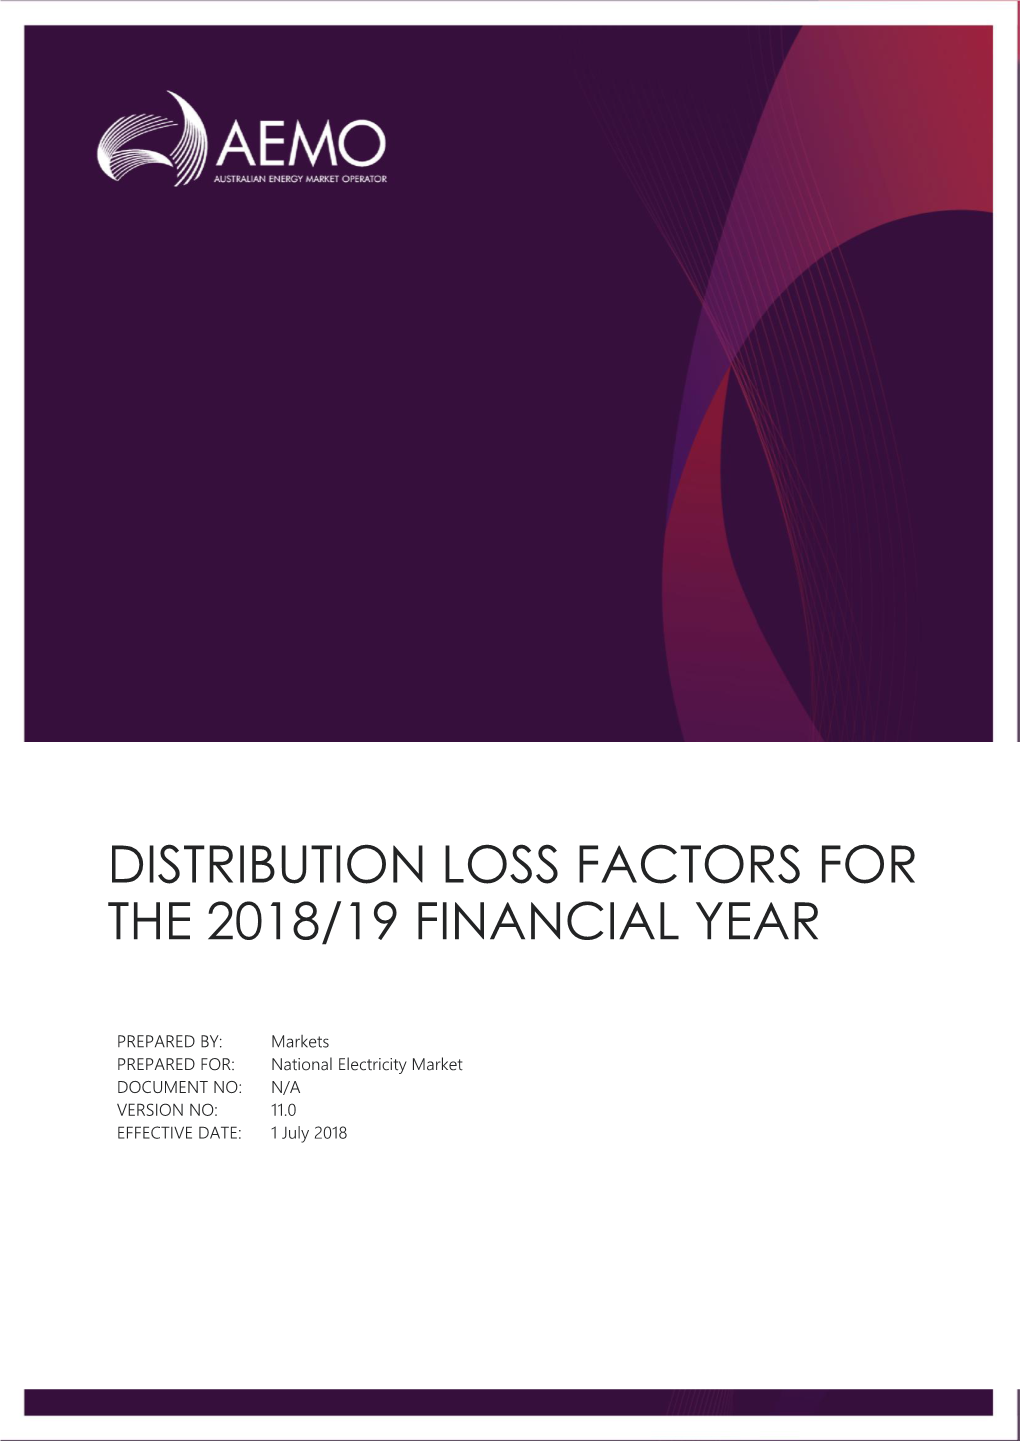 Distribution Loss Factors for the 2018/19 Financial Year